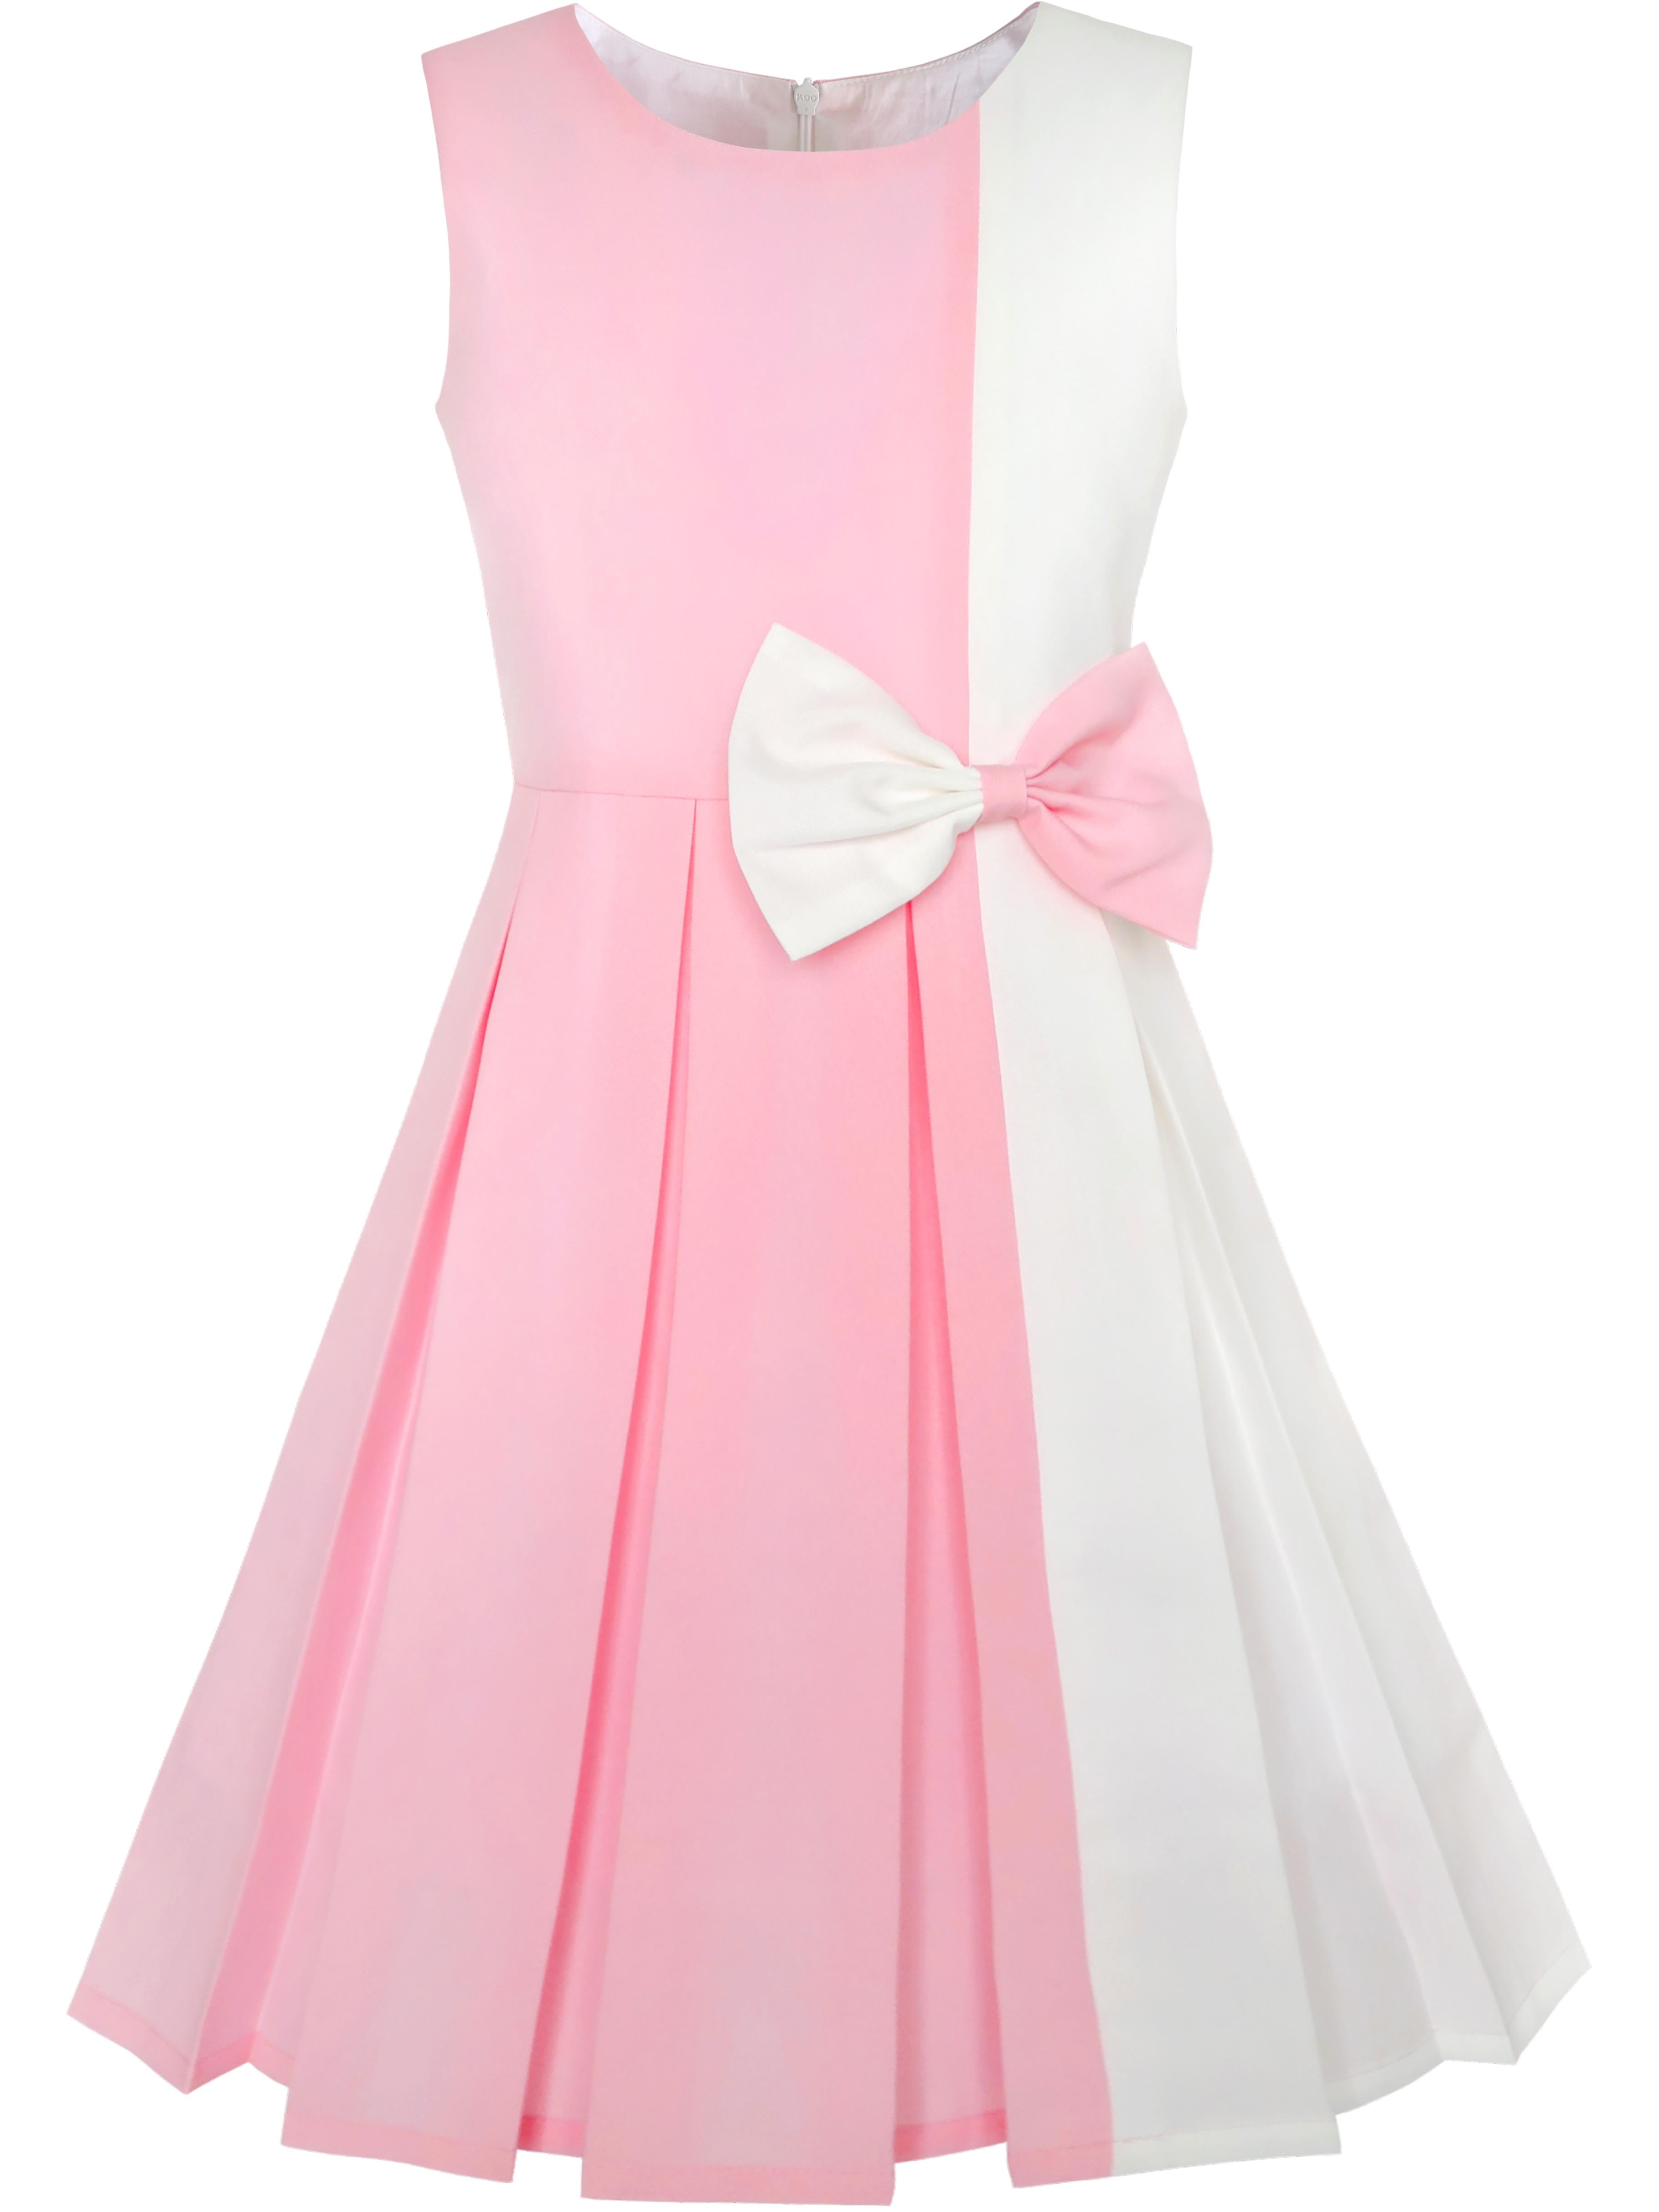 Girls Dress Color Block Contrast Bow ...